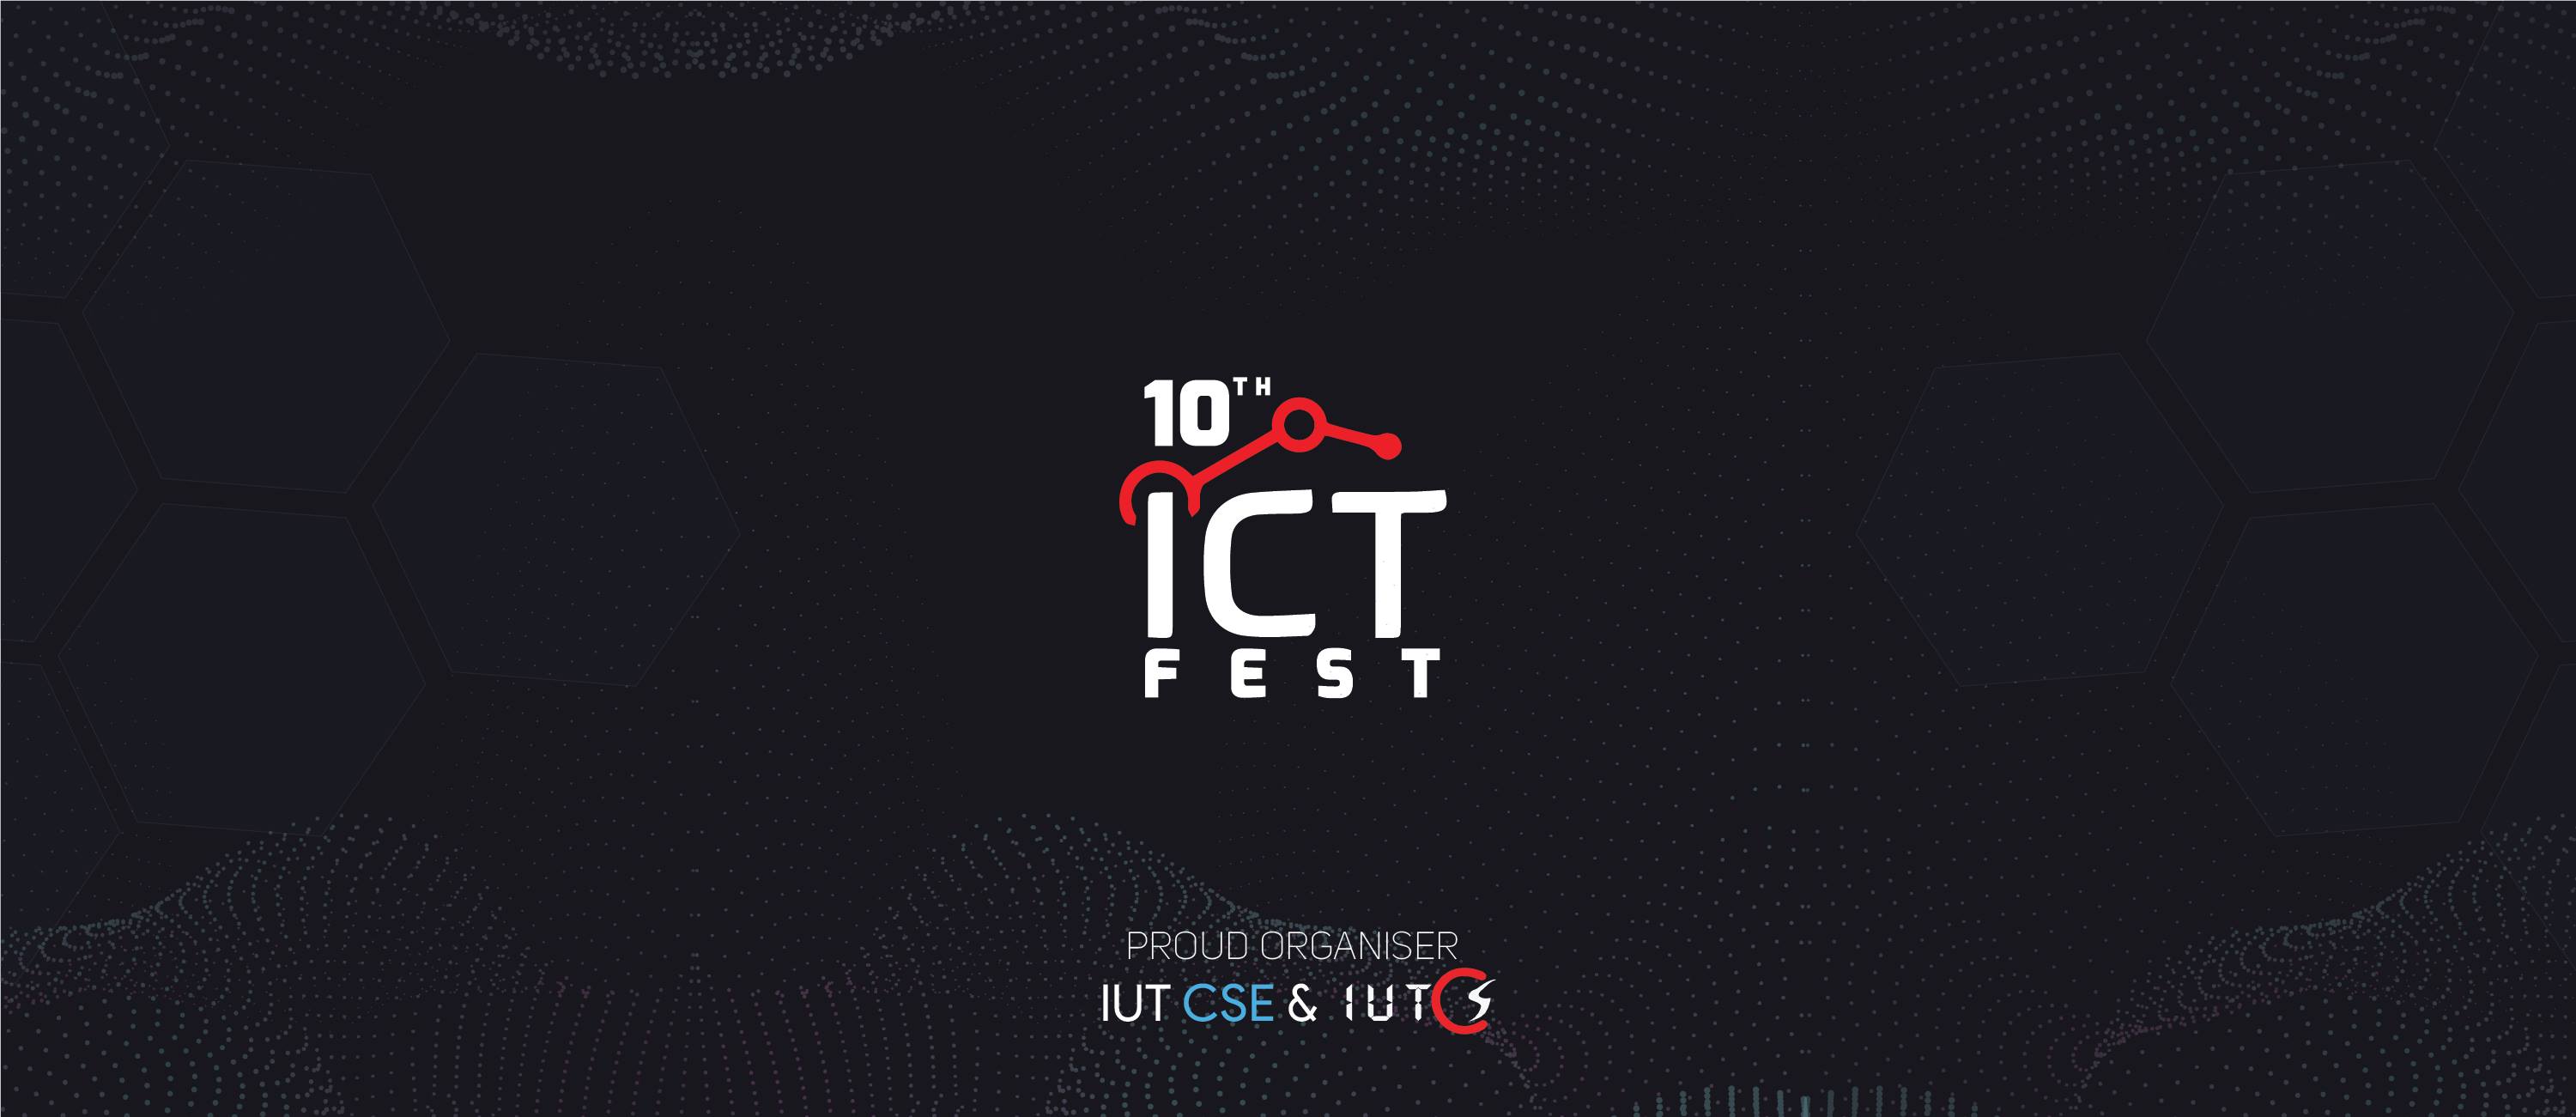 IUT 10th ICT FEST Are you ready for one of the biggest ICT fest